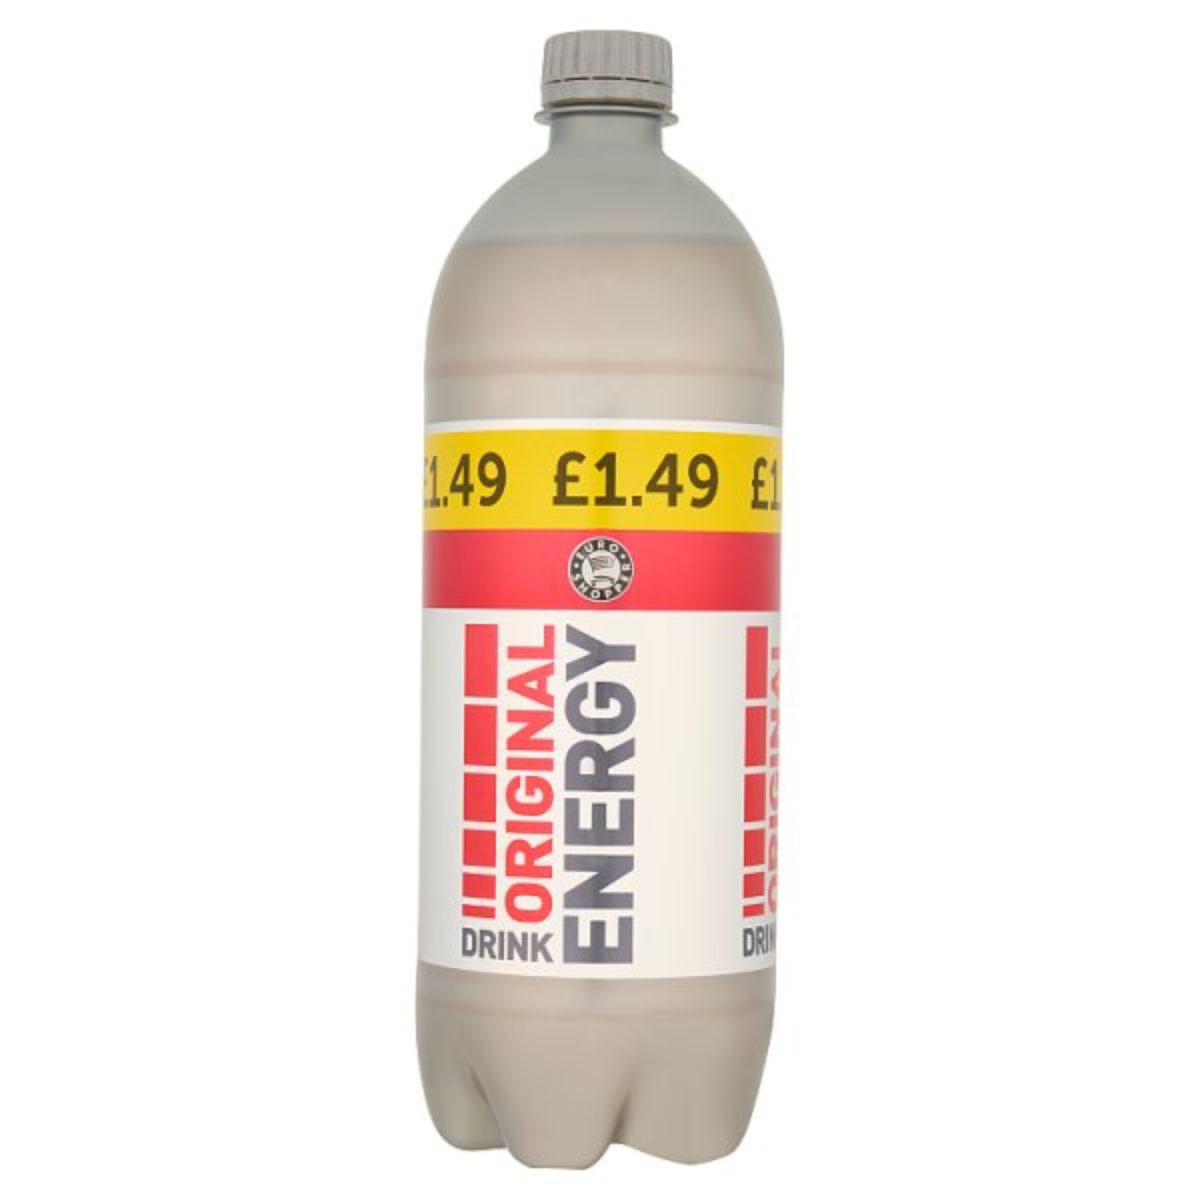 A bottle of Euro Shopper - Original Energy Drink - 1L on a white background.